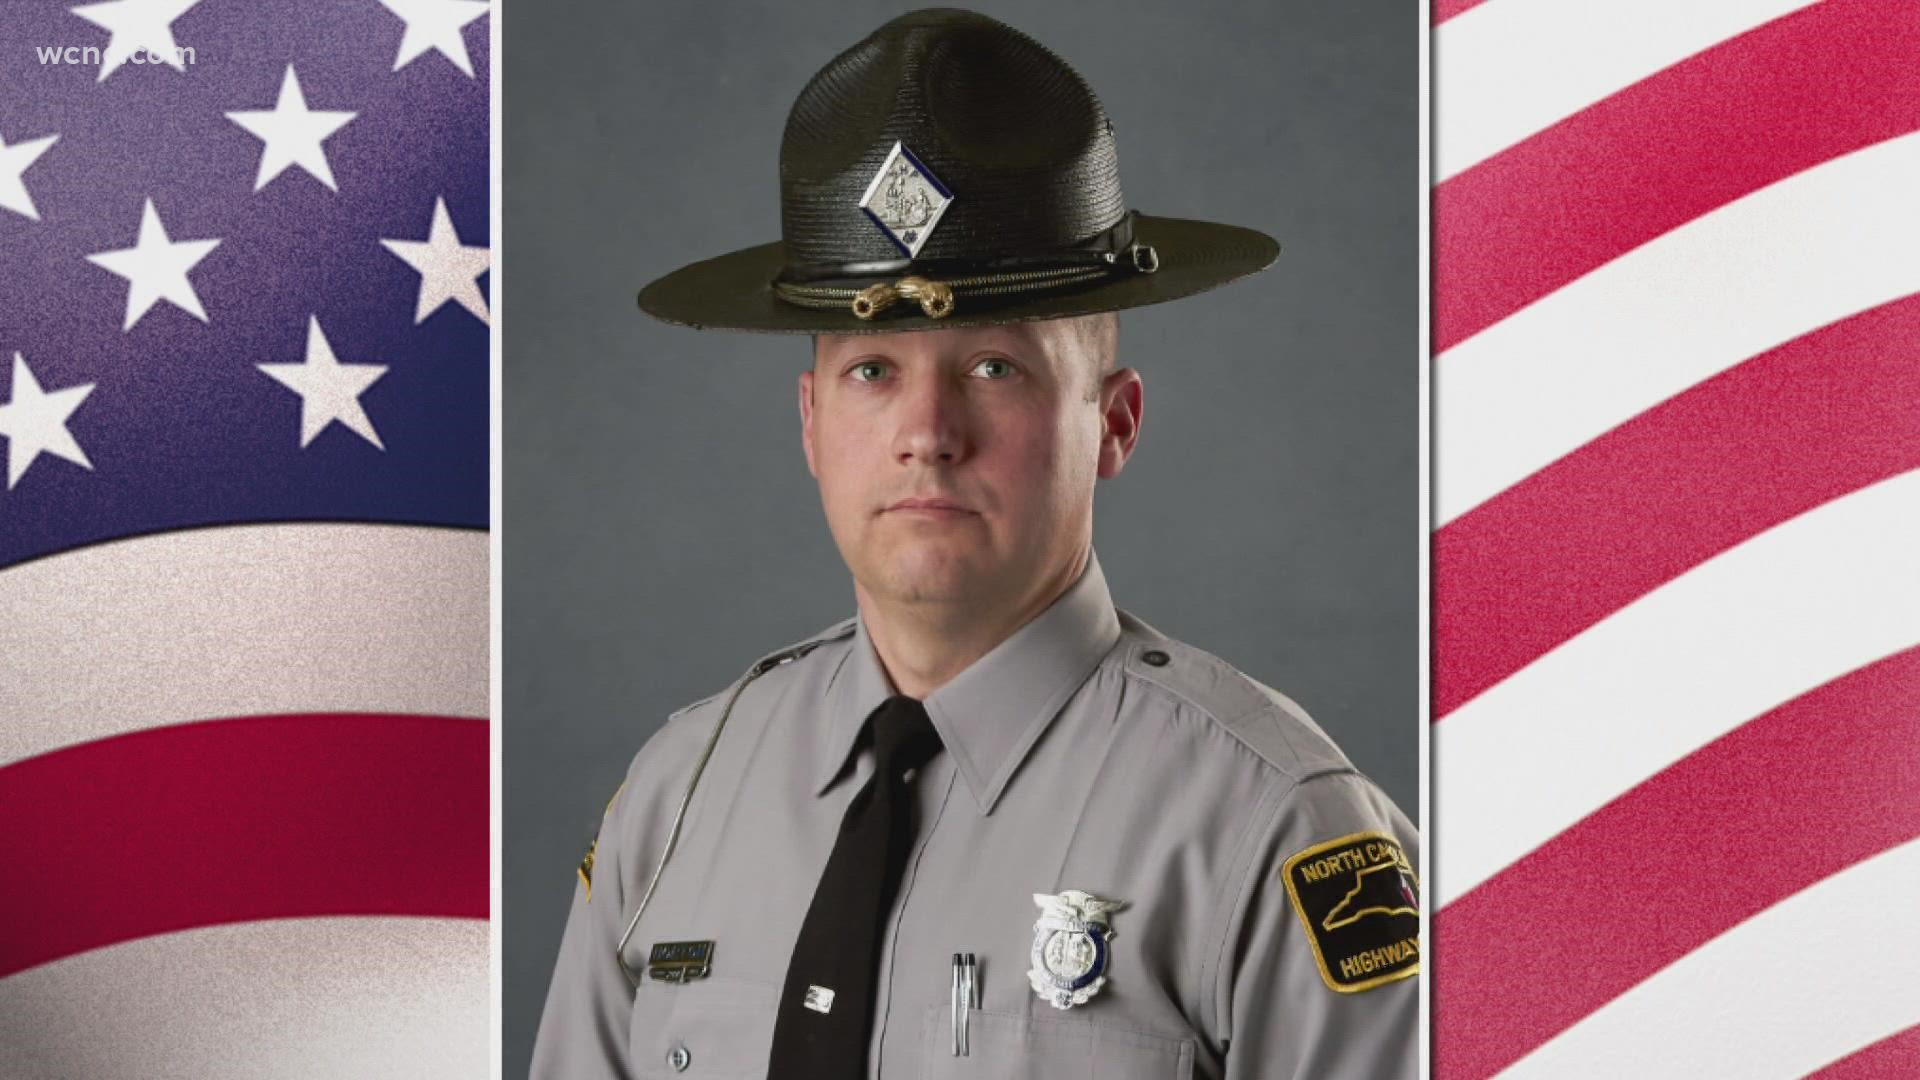 A North Carolina Highway Patrol trooper killed in the line of duty was laid to rest Friday.